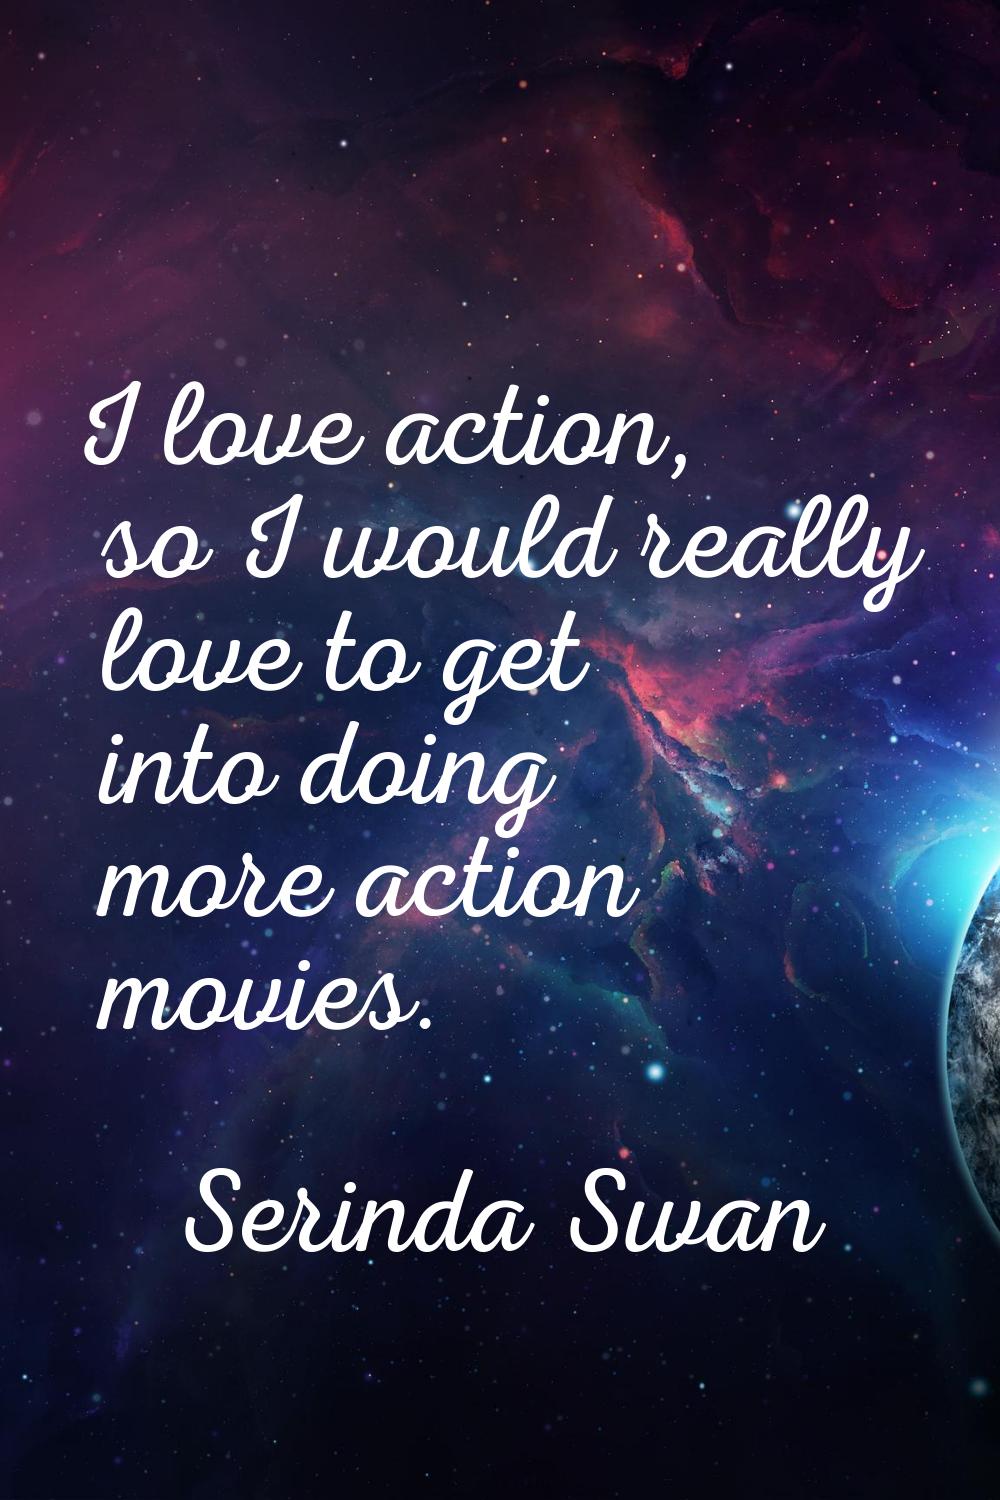 I love action, so I would really love to get into doing more action movies.